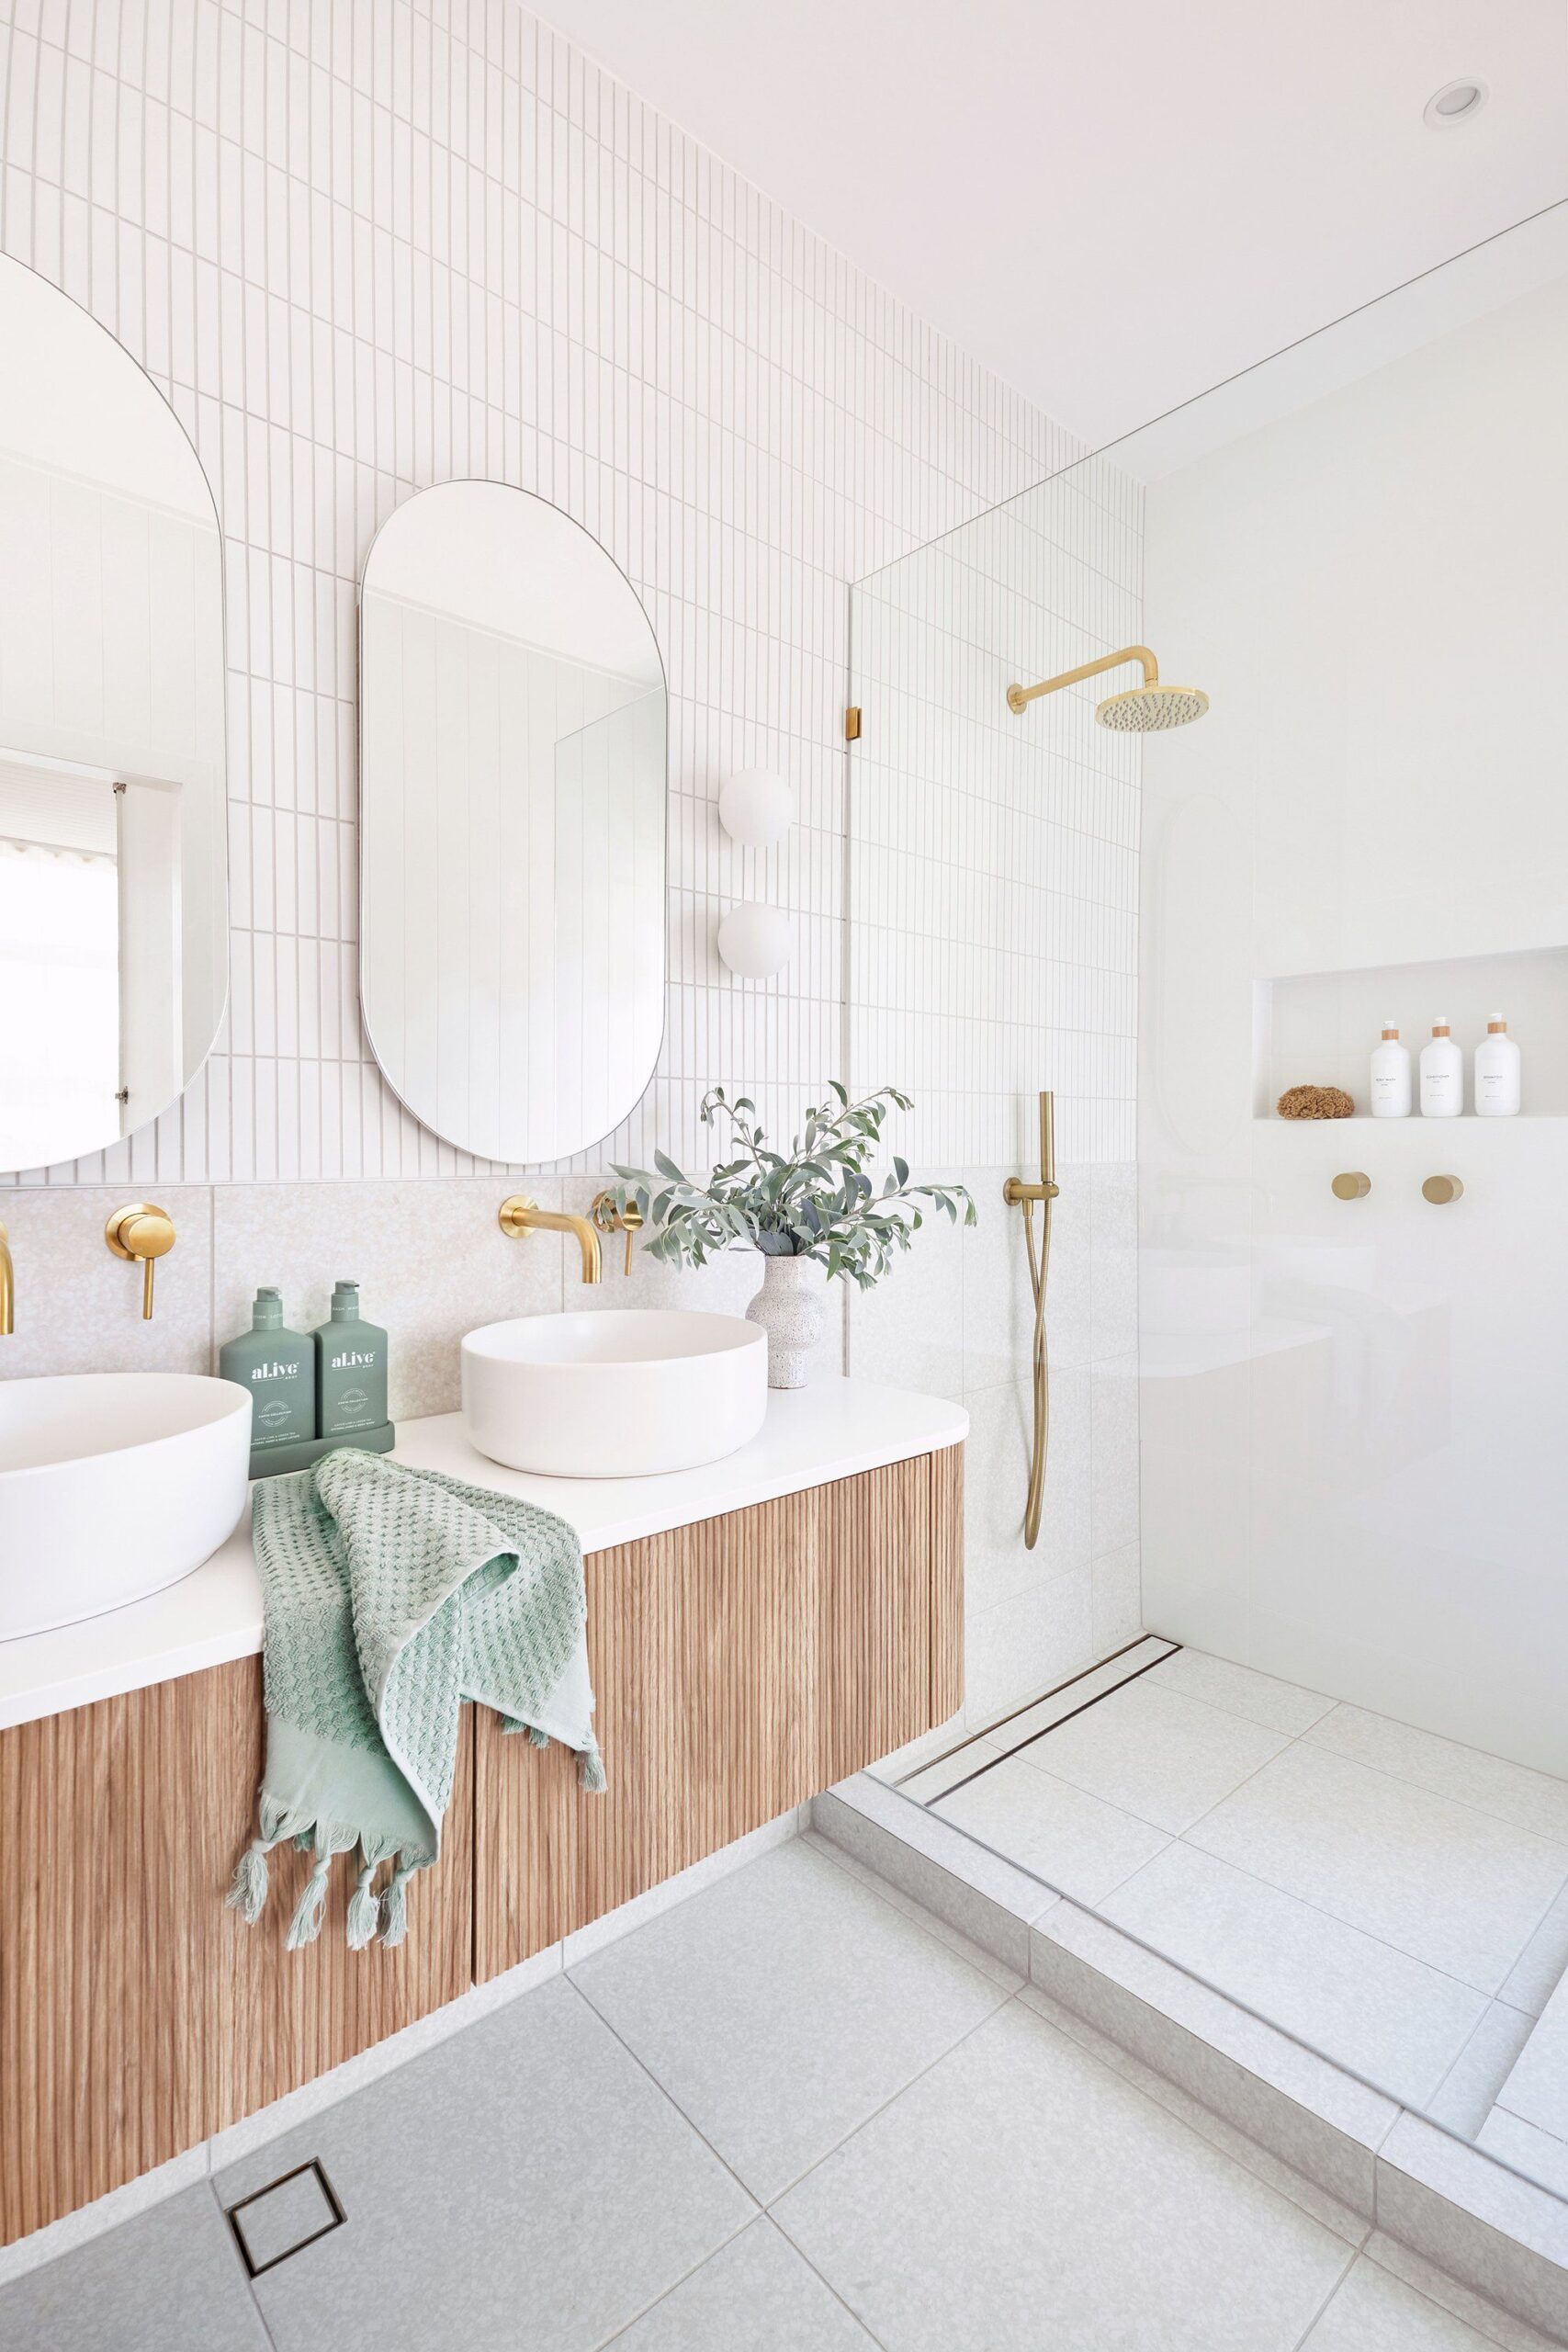 Prepare before you go for bathroom remodels